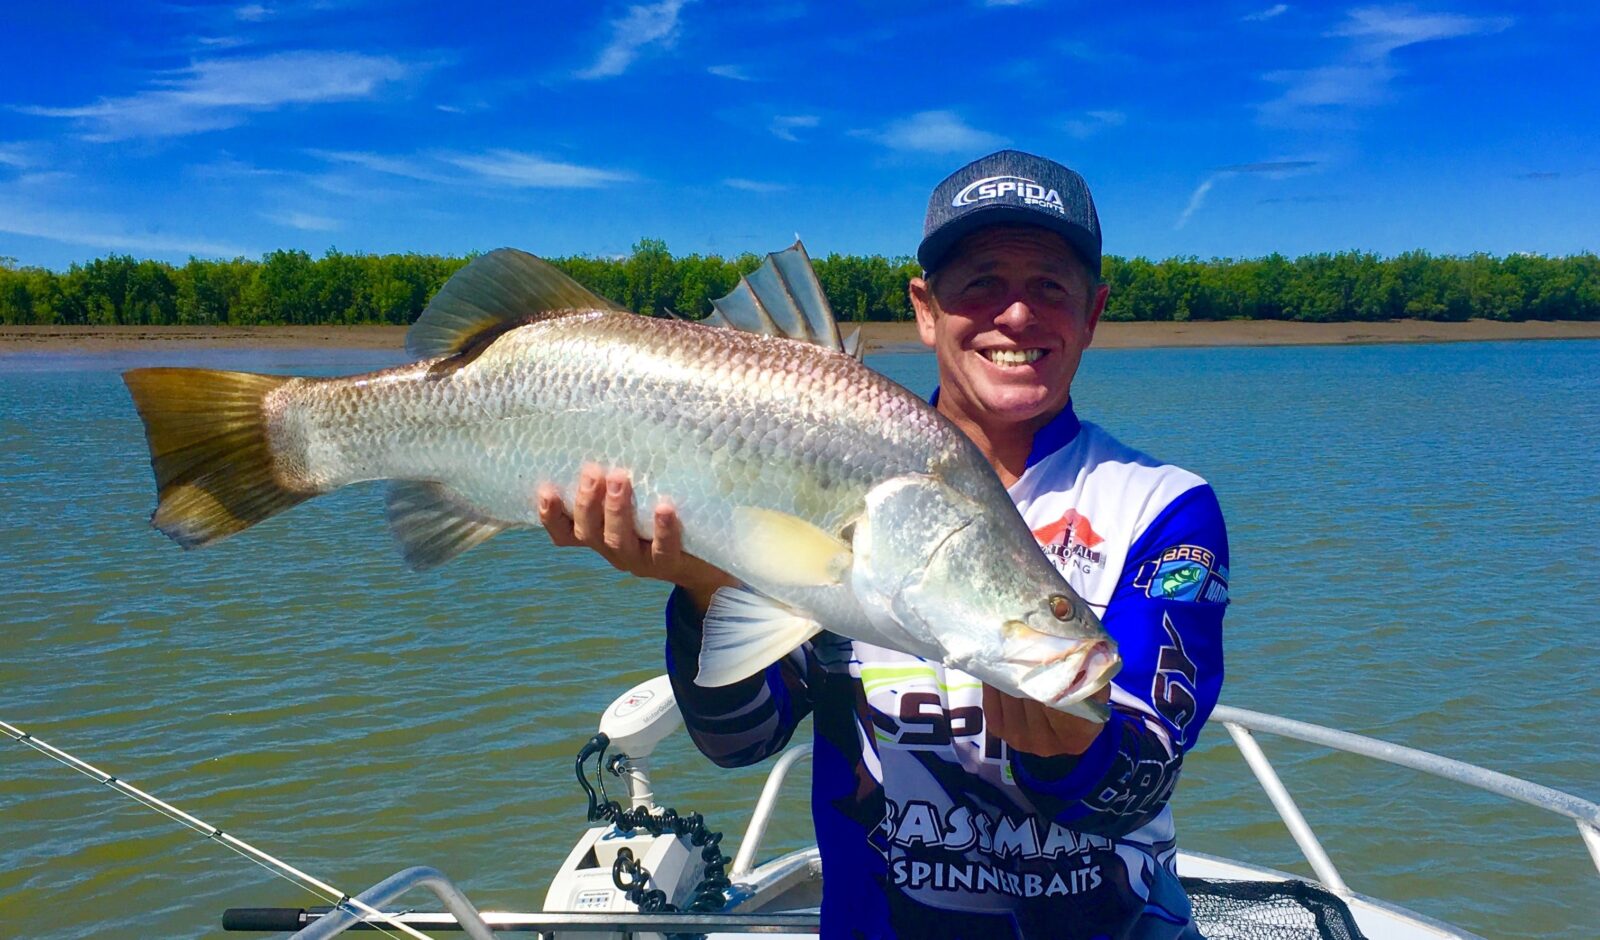 The iconic Barramundi caught in the Fiztroy River in Rockhampton